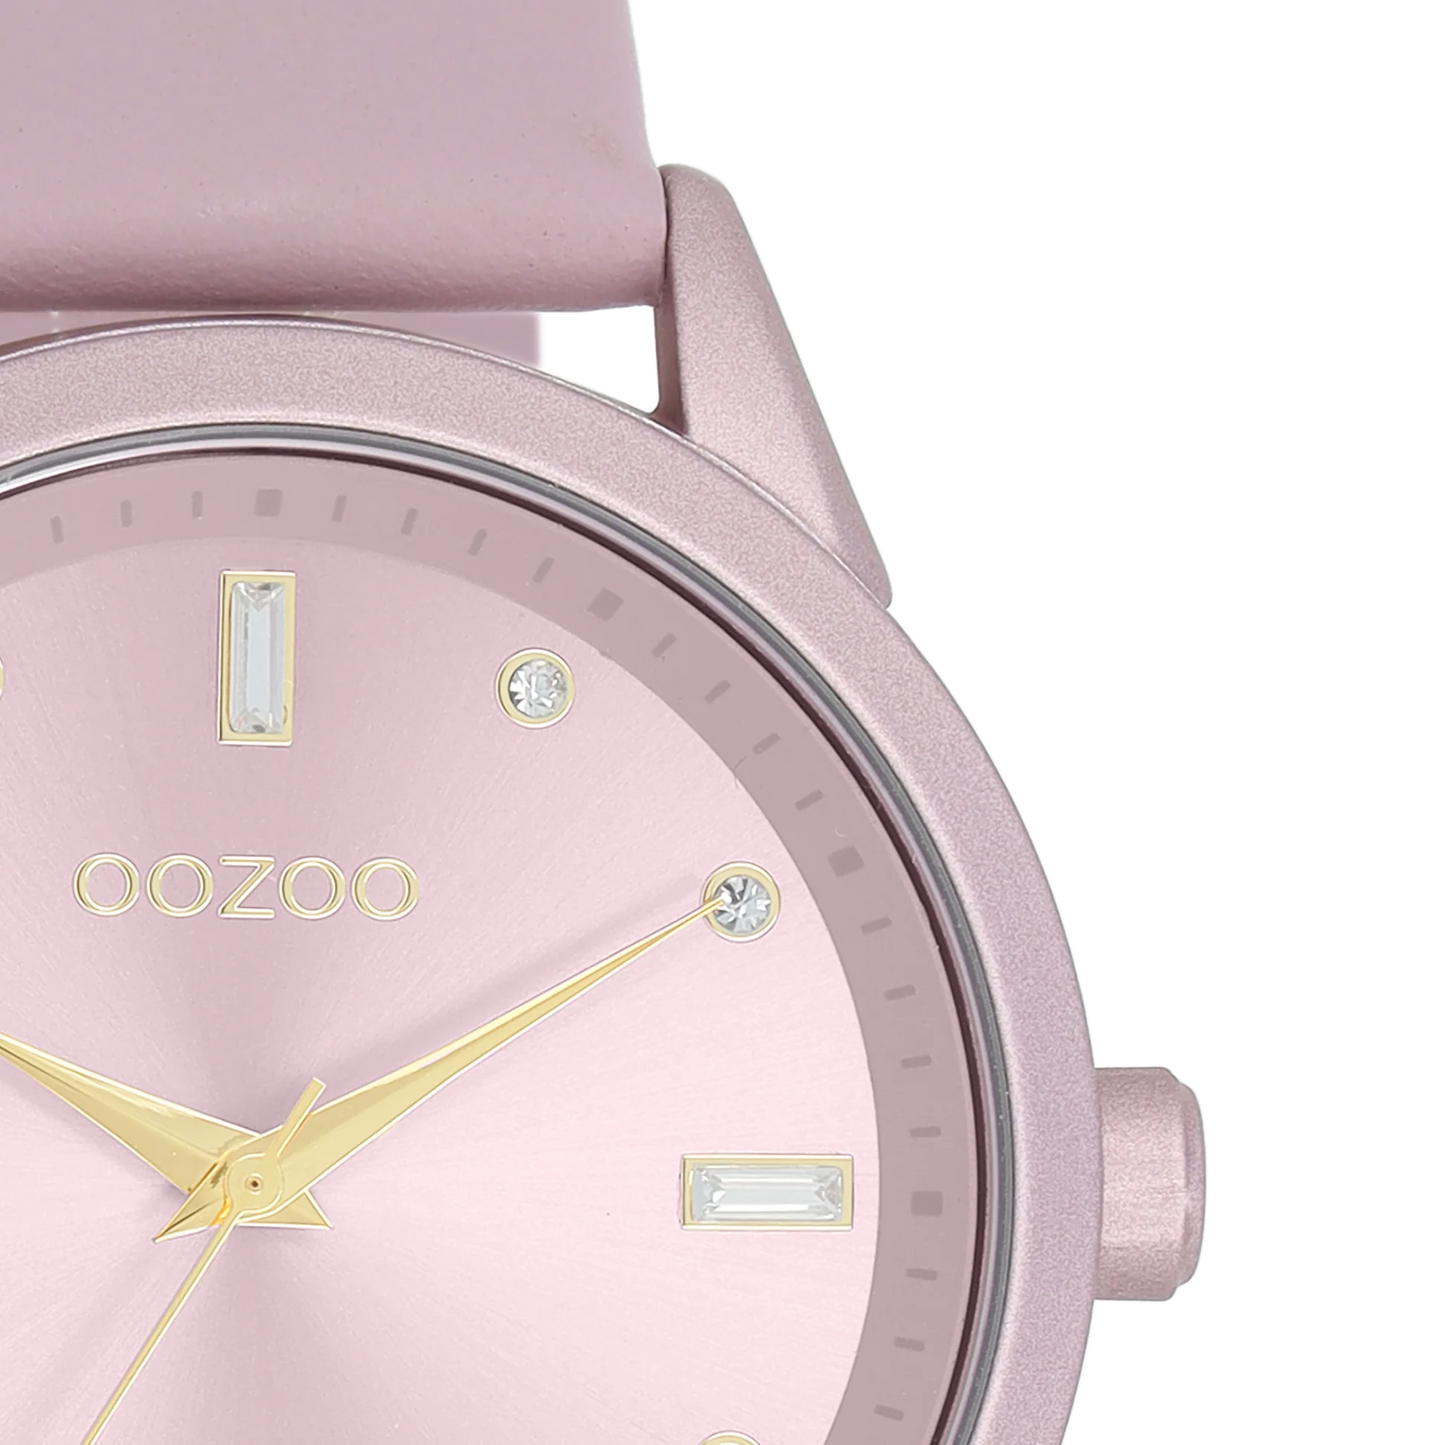 OOZOO C11355 40mm Timepieces Lilac Leather Strap